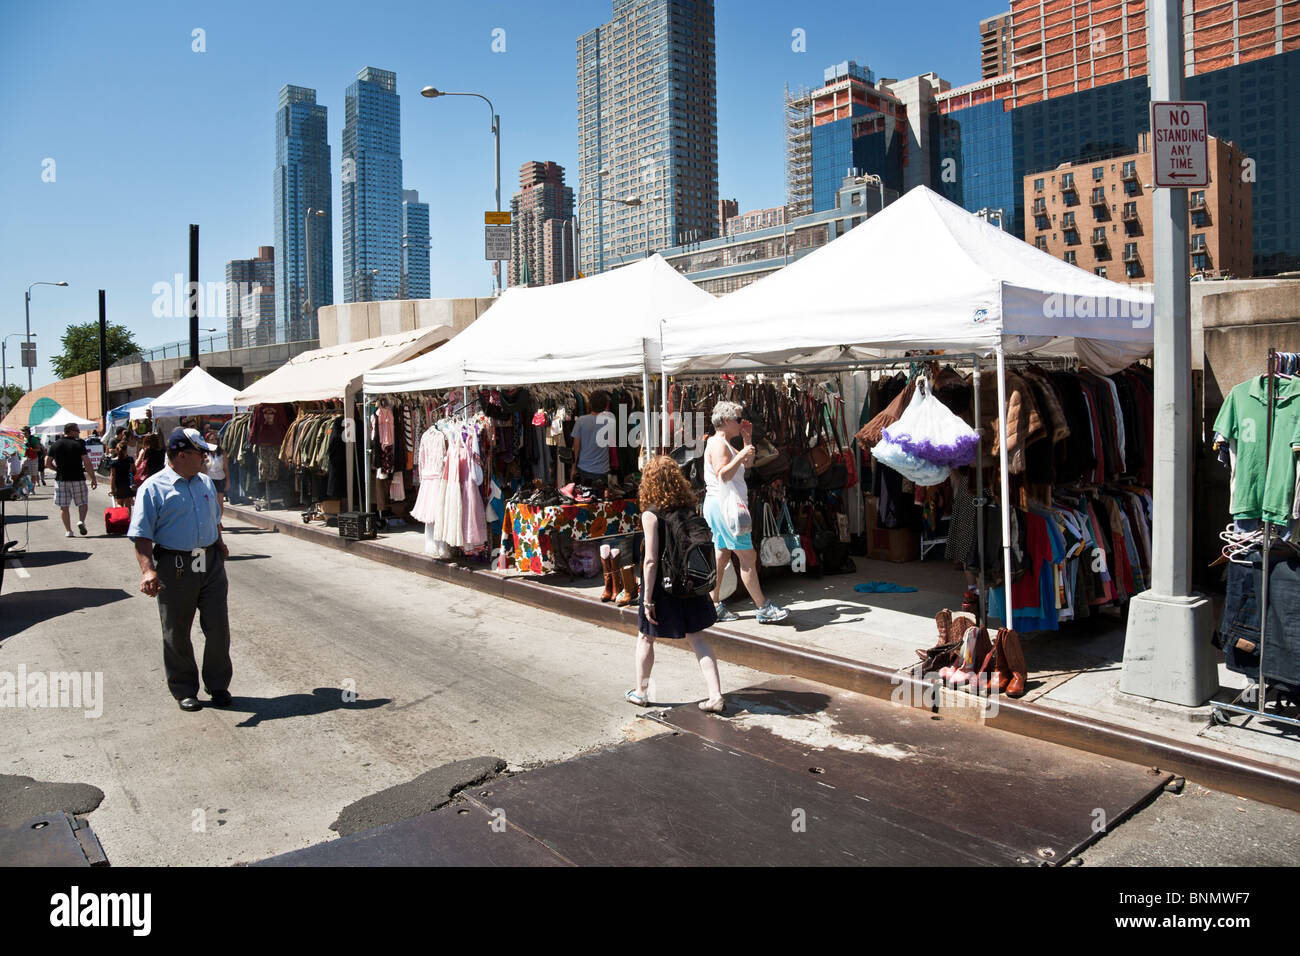 people stroll west 39th street browsing stalls selling recycled clothing  & furs at Hells Kitchen weekend flea market New York Stock Photo